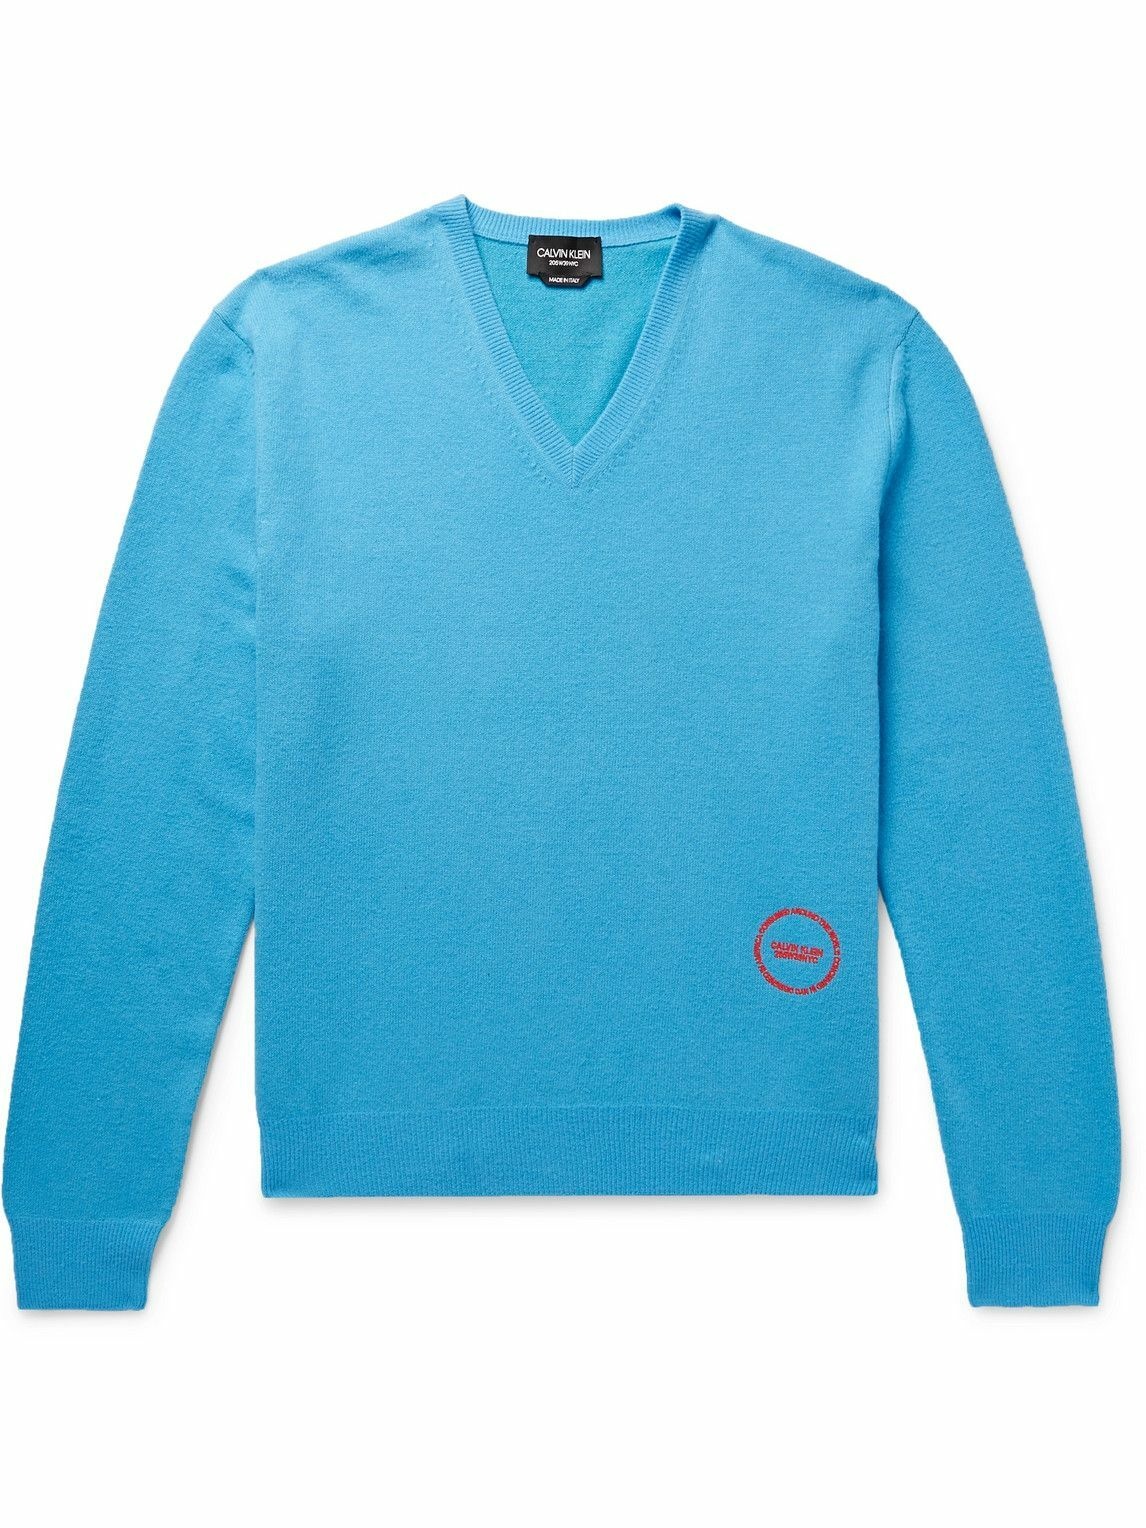 Photo: CALVIN KLEIN 205W39NYC - Logo-Embroidered Wool and Cotton-Blend Sweater - Blue